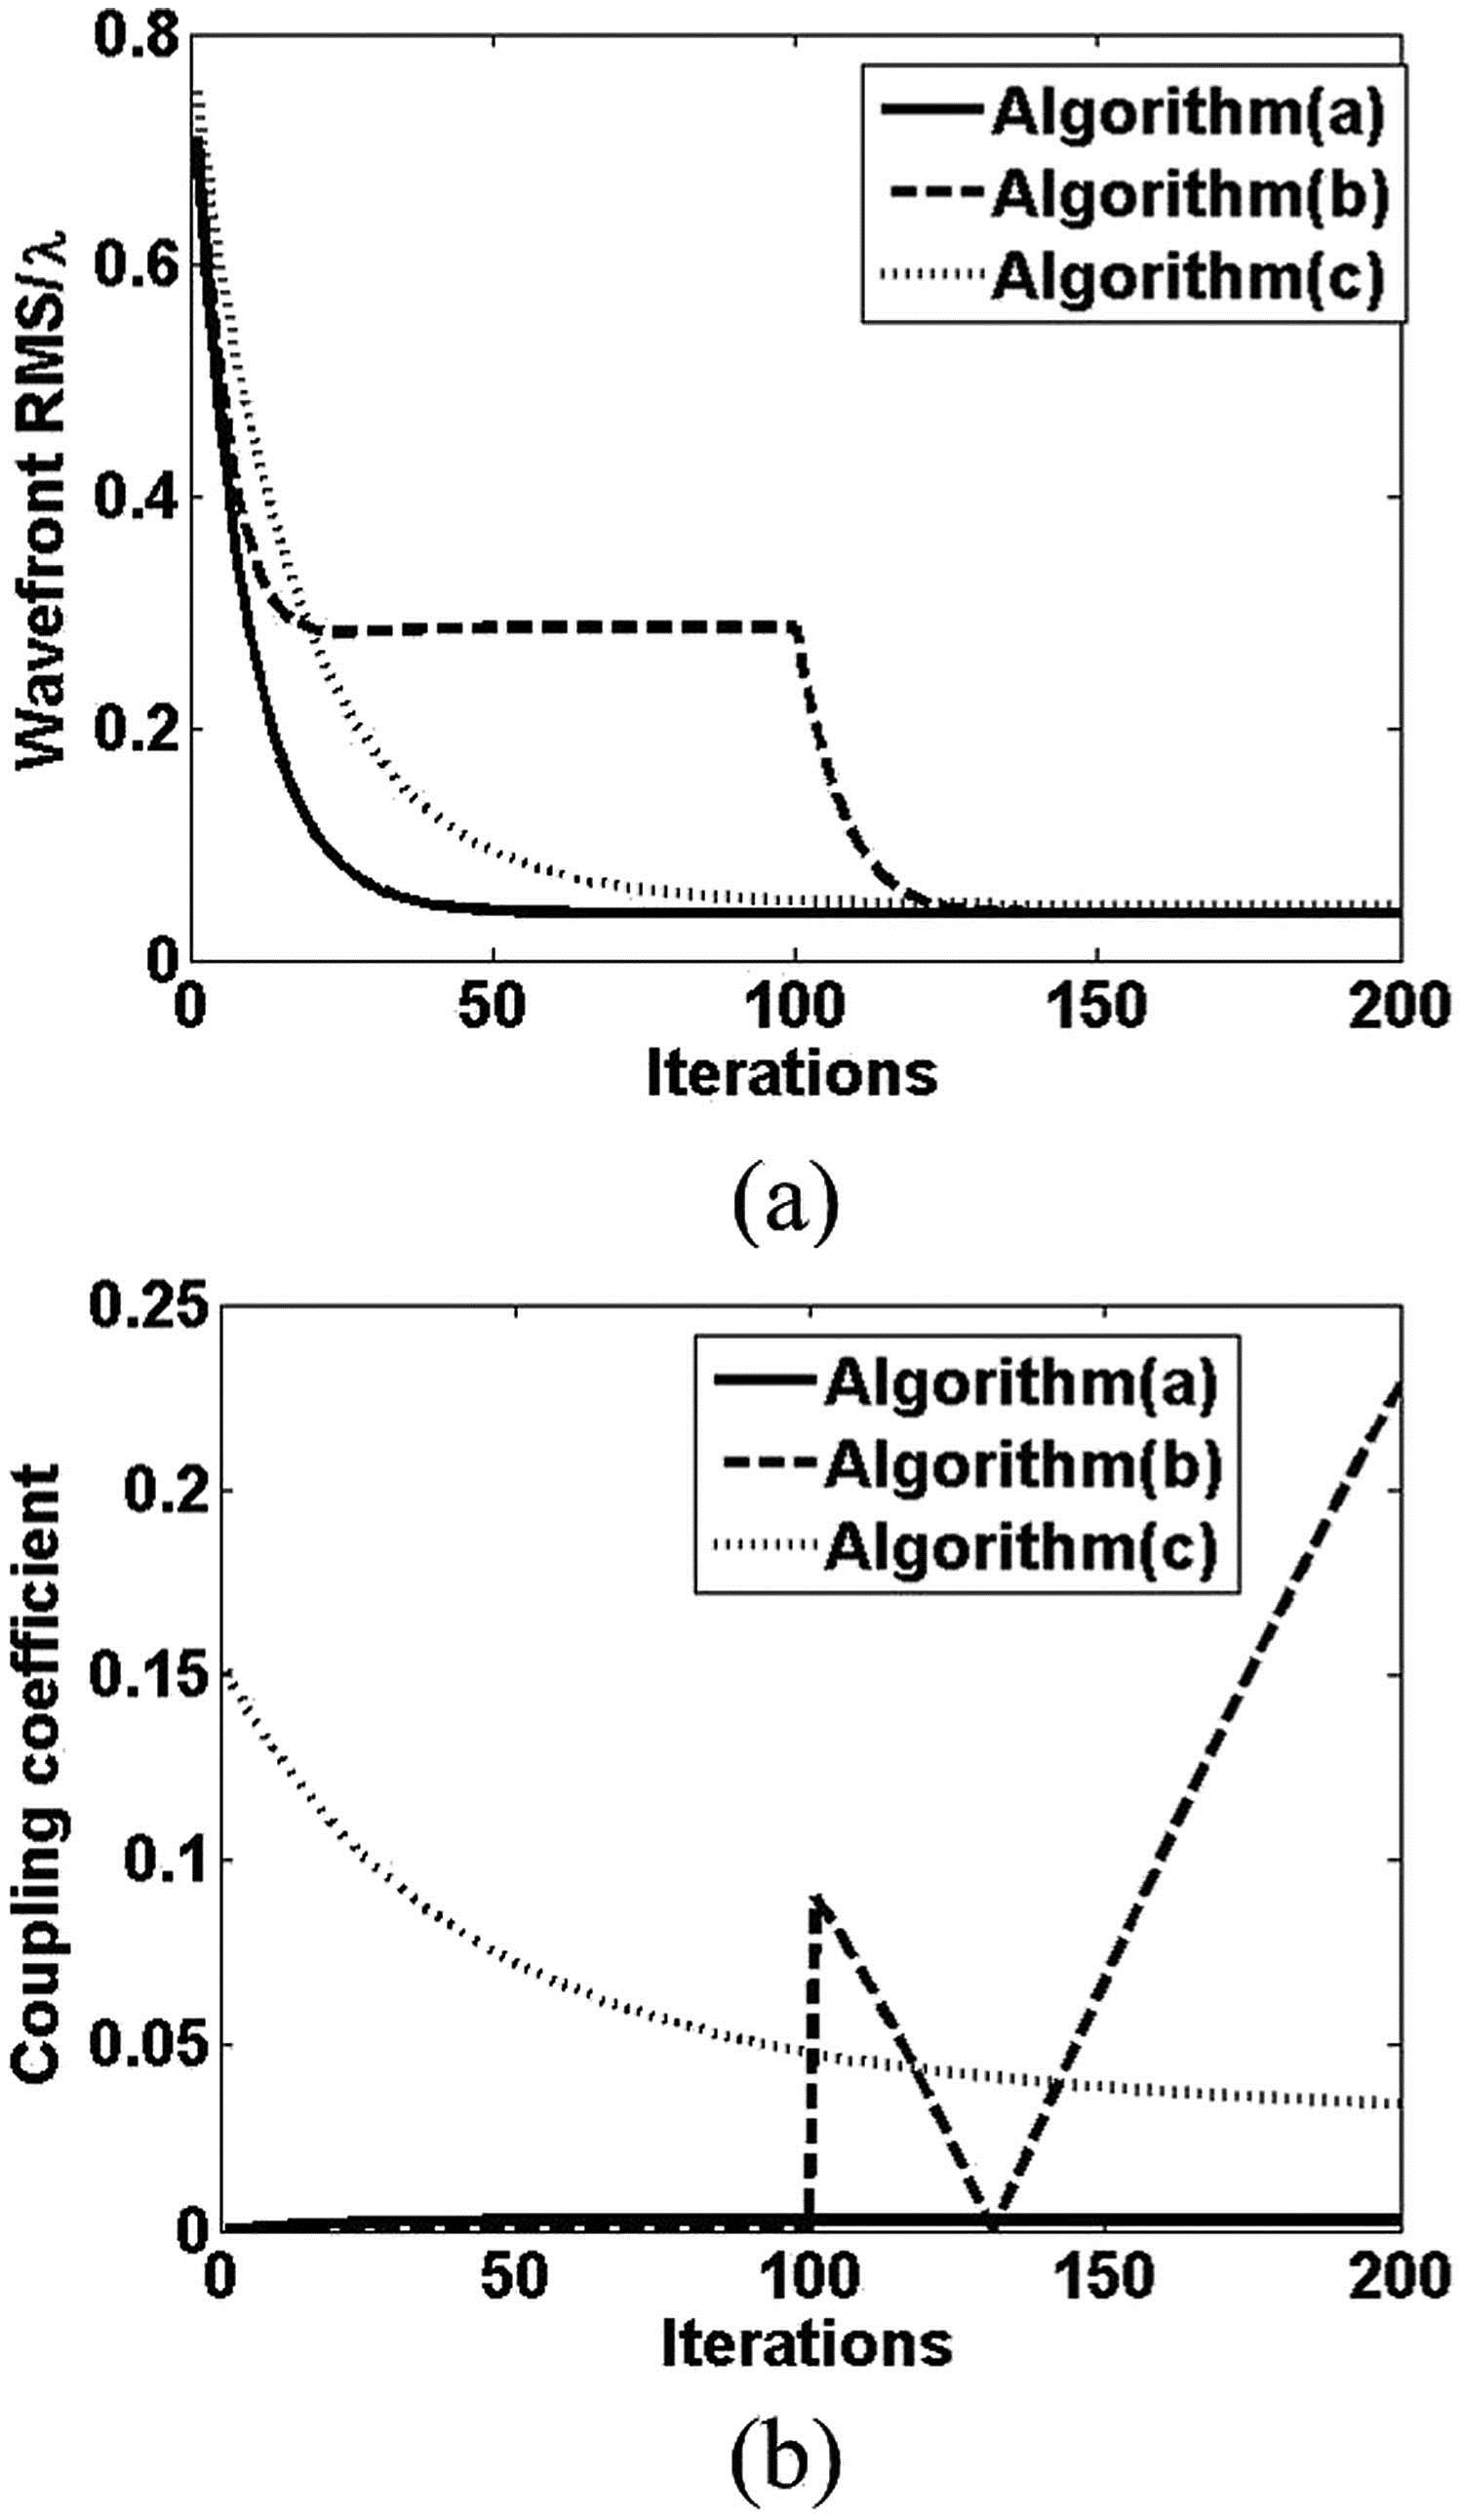 (a) RMS of the residual wavefront during correction. (b) Coupling coefficient during correction.